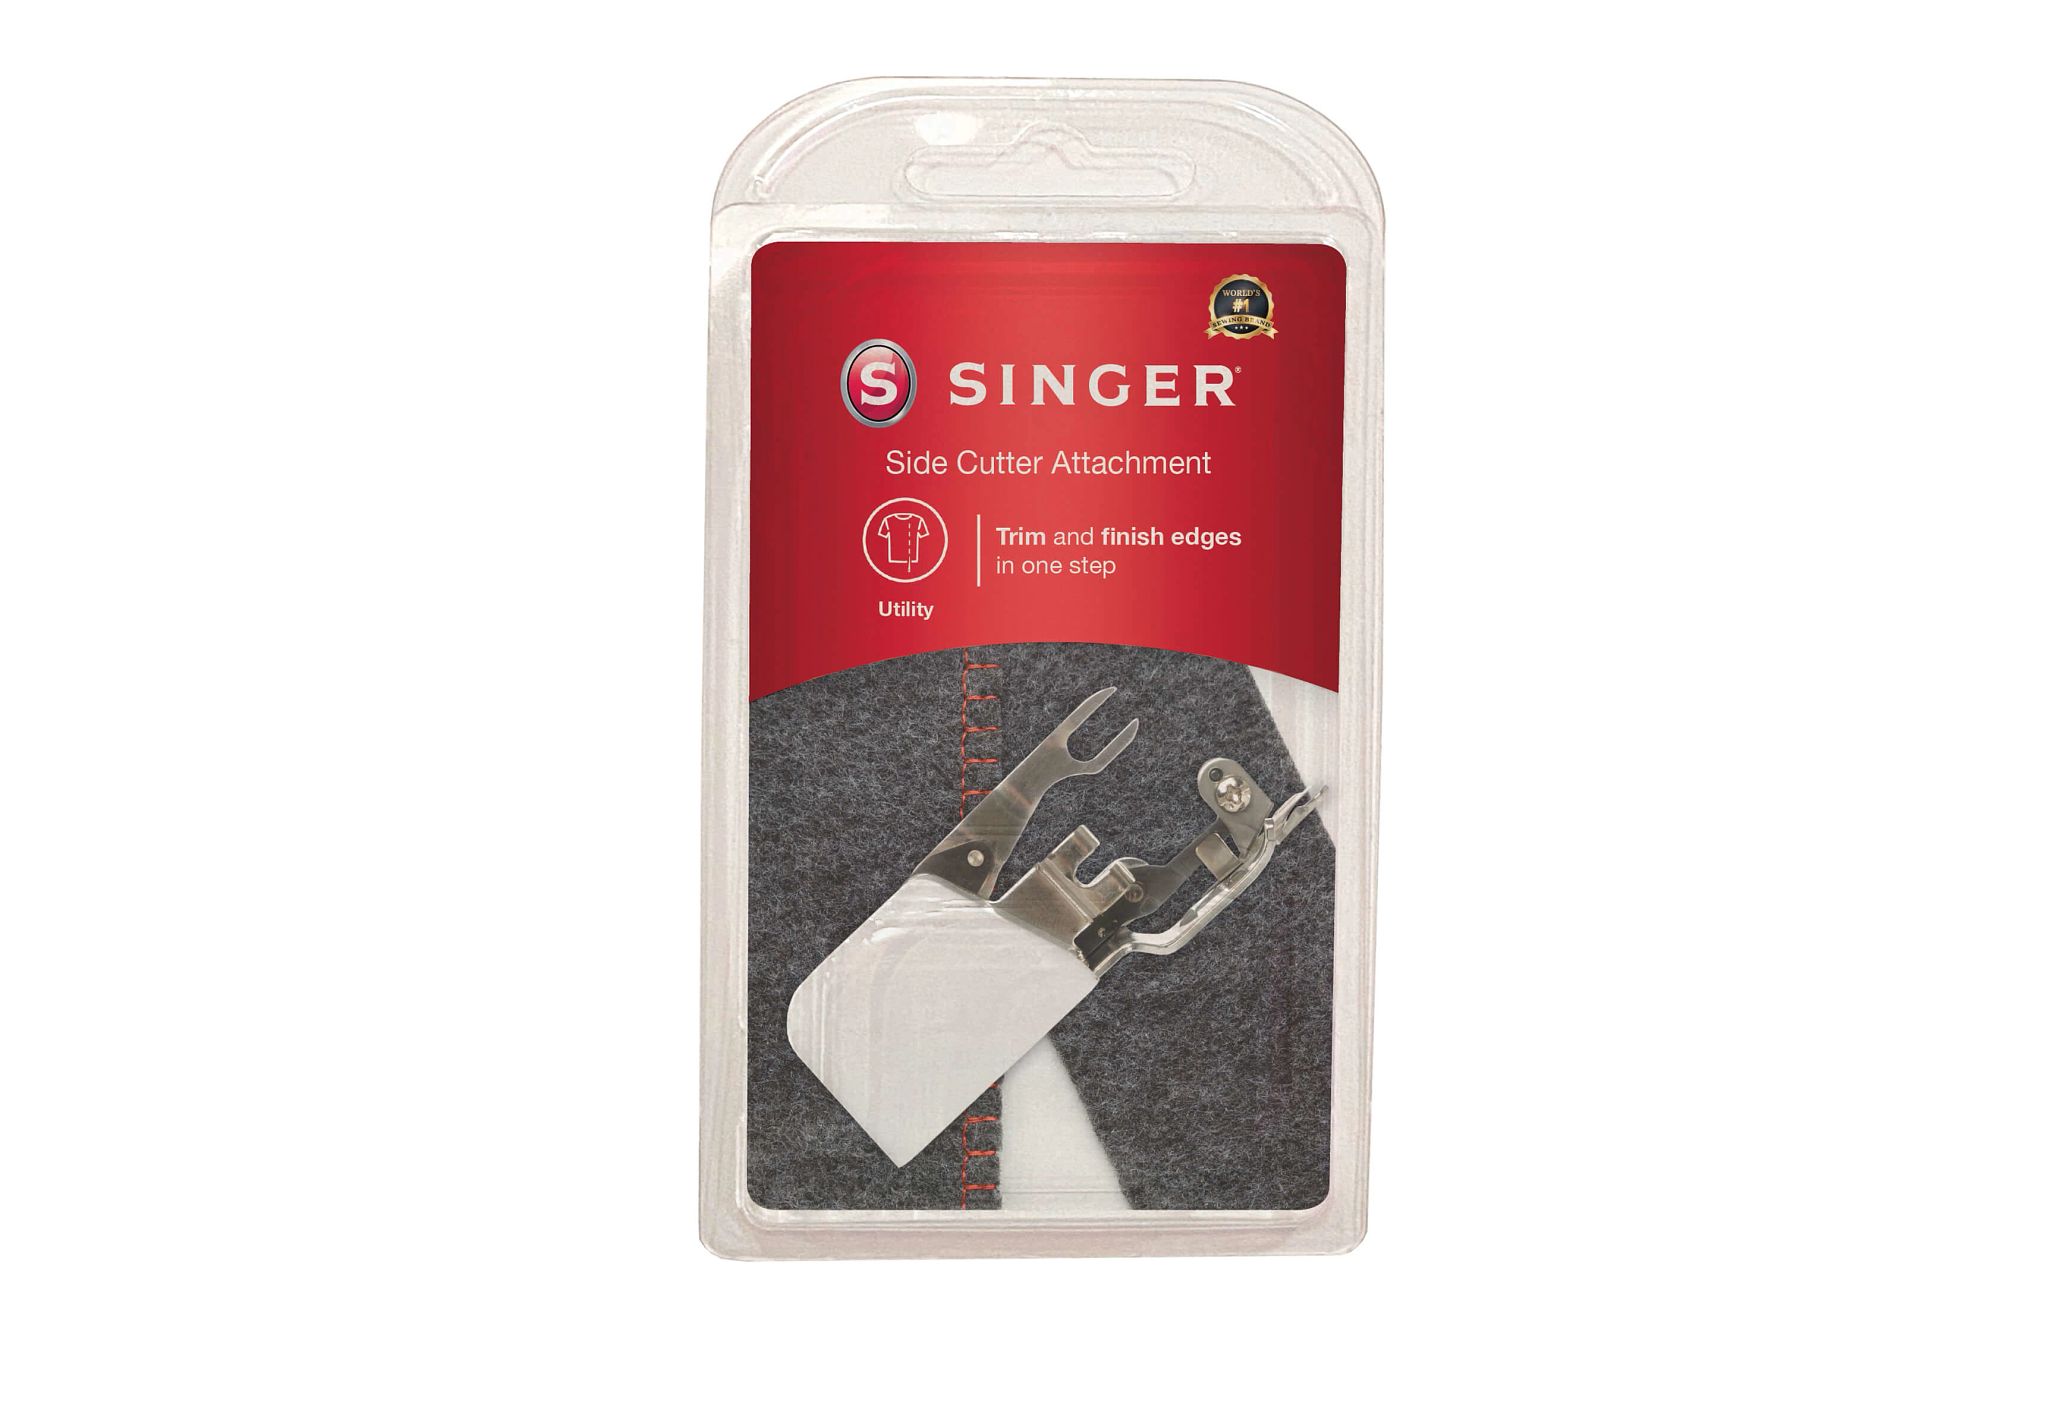 SINGER | Heavy Duty 4452 Sewing Machine, Gray & Side Cutter Attachment  Presser Foot, Simutaneously Trims & Hems Edges, Zig-Zag or Overstitch -  Sewing